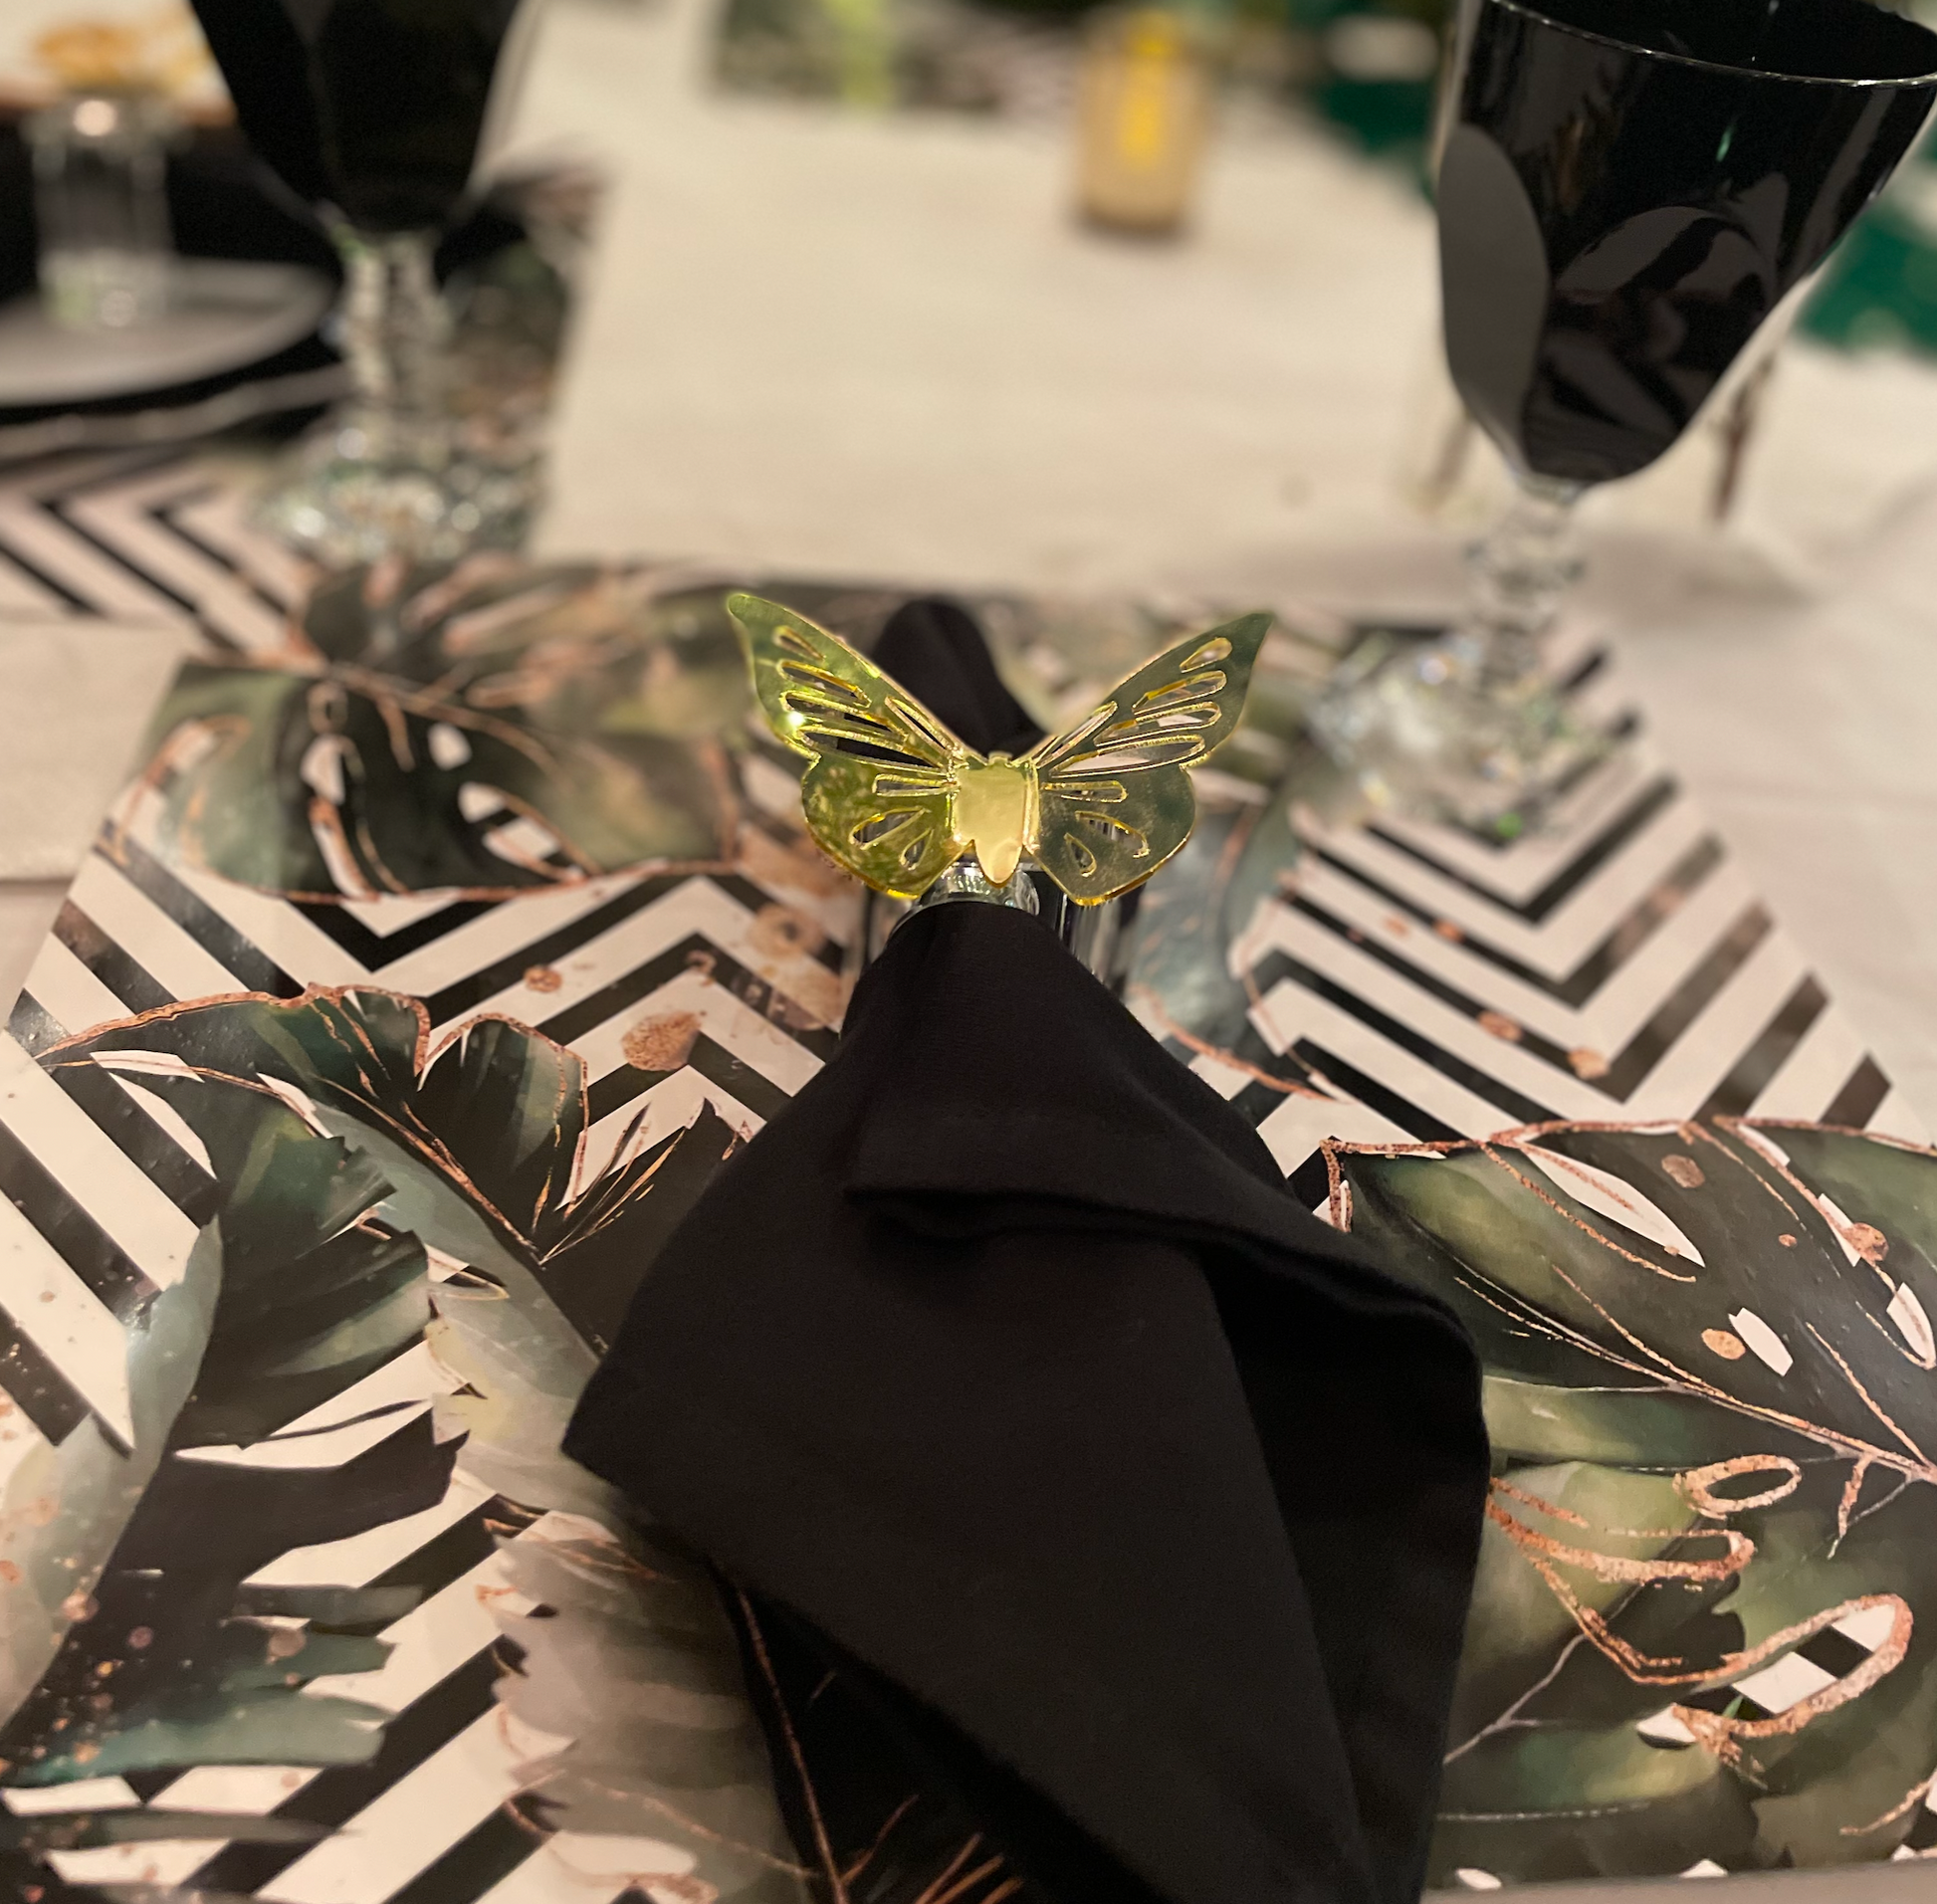 Paper butterflies Wedding Party table decorations black and gold